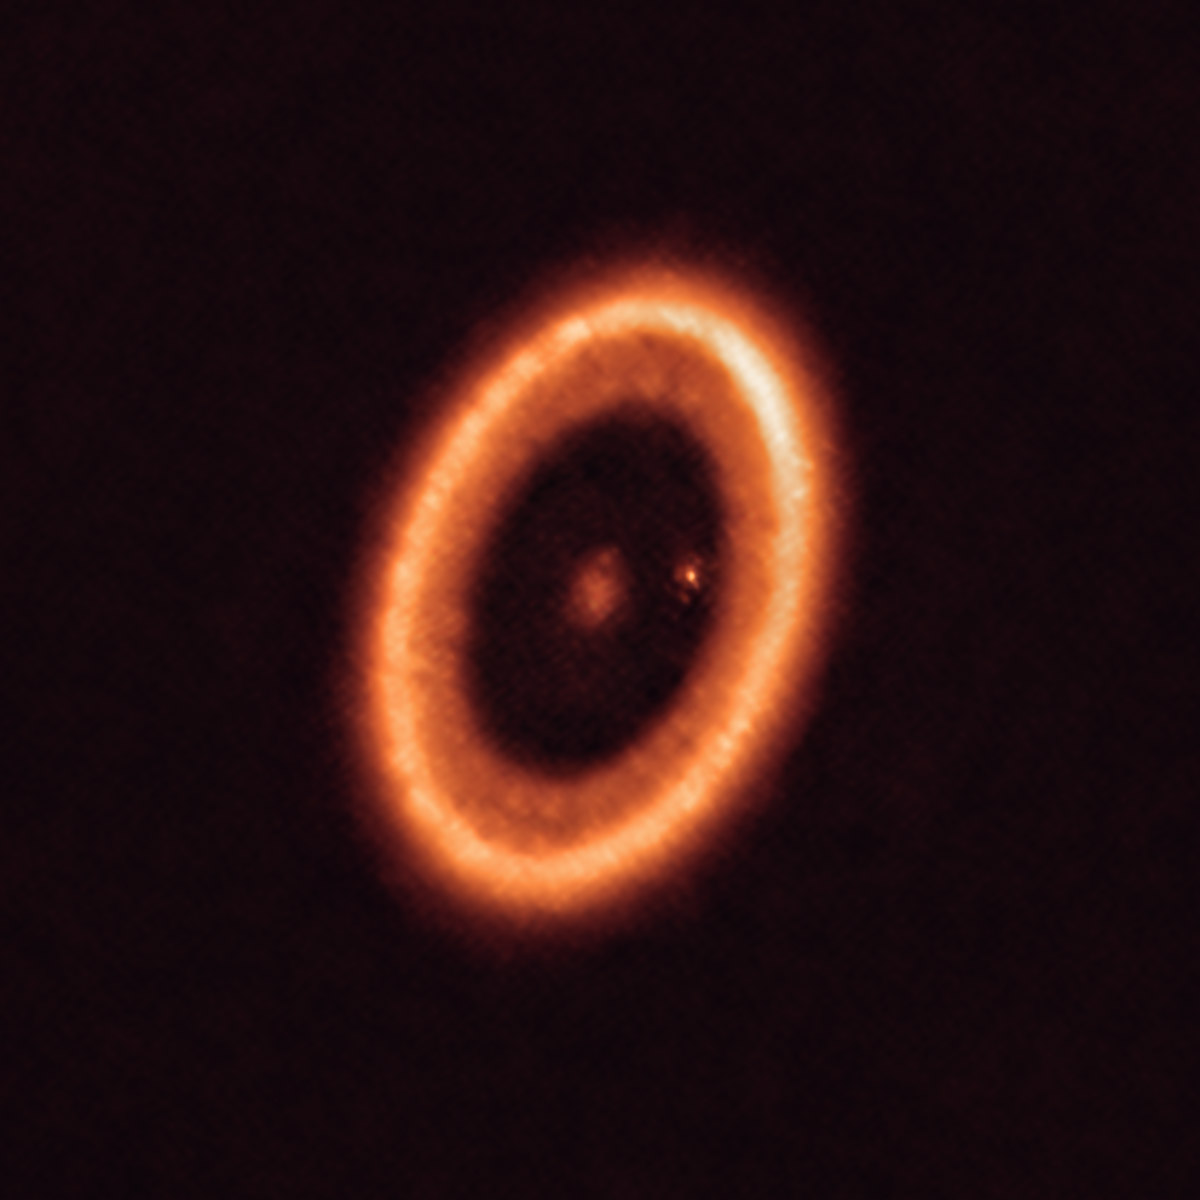 This image shows the PDS 70 system, located nearly 400 light-years away and still in the process of being formed. The system features a star at its center, and at least two planets orbiting it, called PDS 70b (not visible in the image) and PDS 70c (the dot to the right of the star). The planets have carved a cavity in the circumstellar disk (the ring-like structure that dominates the image) as they gobbled up material from the disk itself, growing in size. In this process, PDS 70c acquired its own circumplanetary disk, which contributes to the growth of the planet and where moons can form.